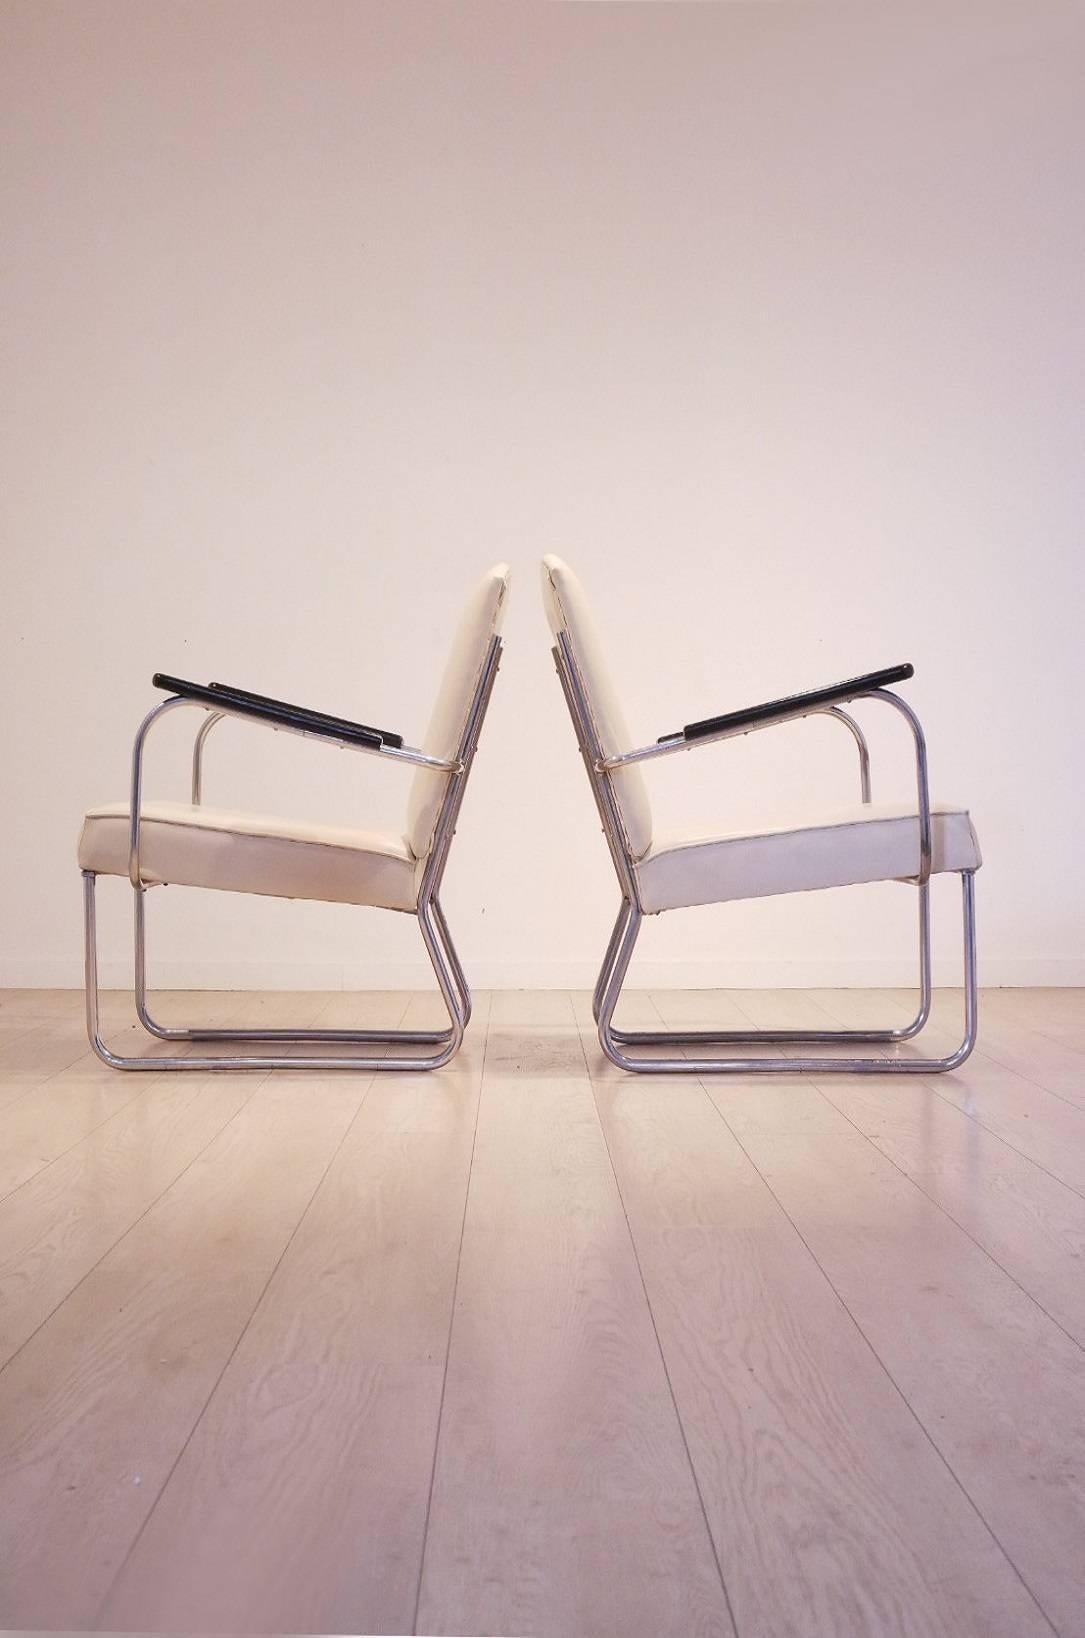 Very rare set of two Bauhaus easy chairs dating from 1935 and designed by Jan Schroefer for Circkel. Original cream colored skai upholstery matched with nickeled metal frame and black painted armrests.